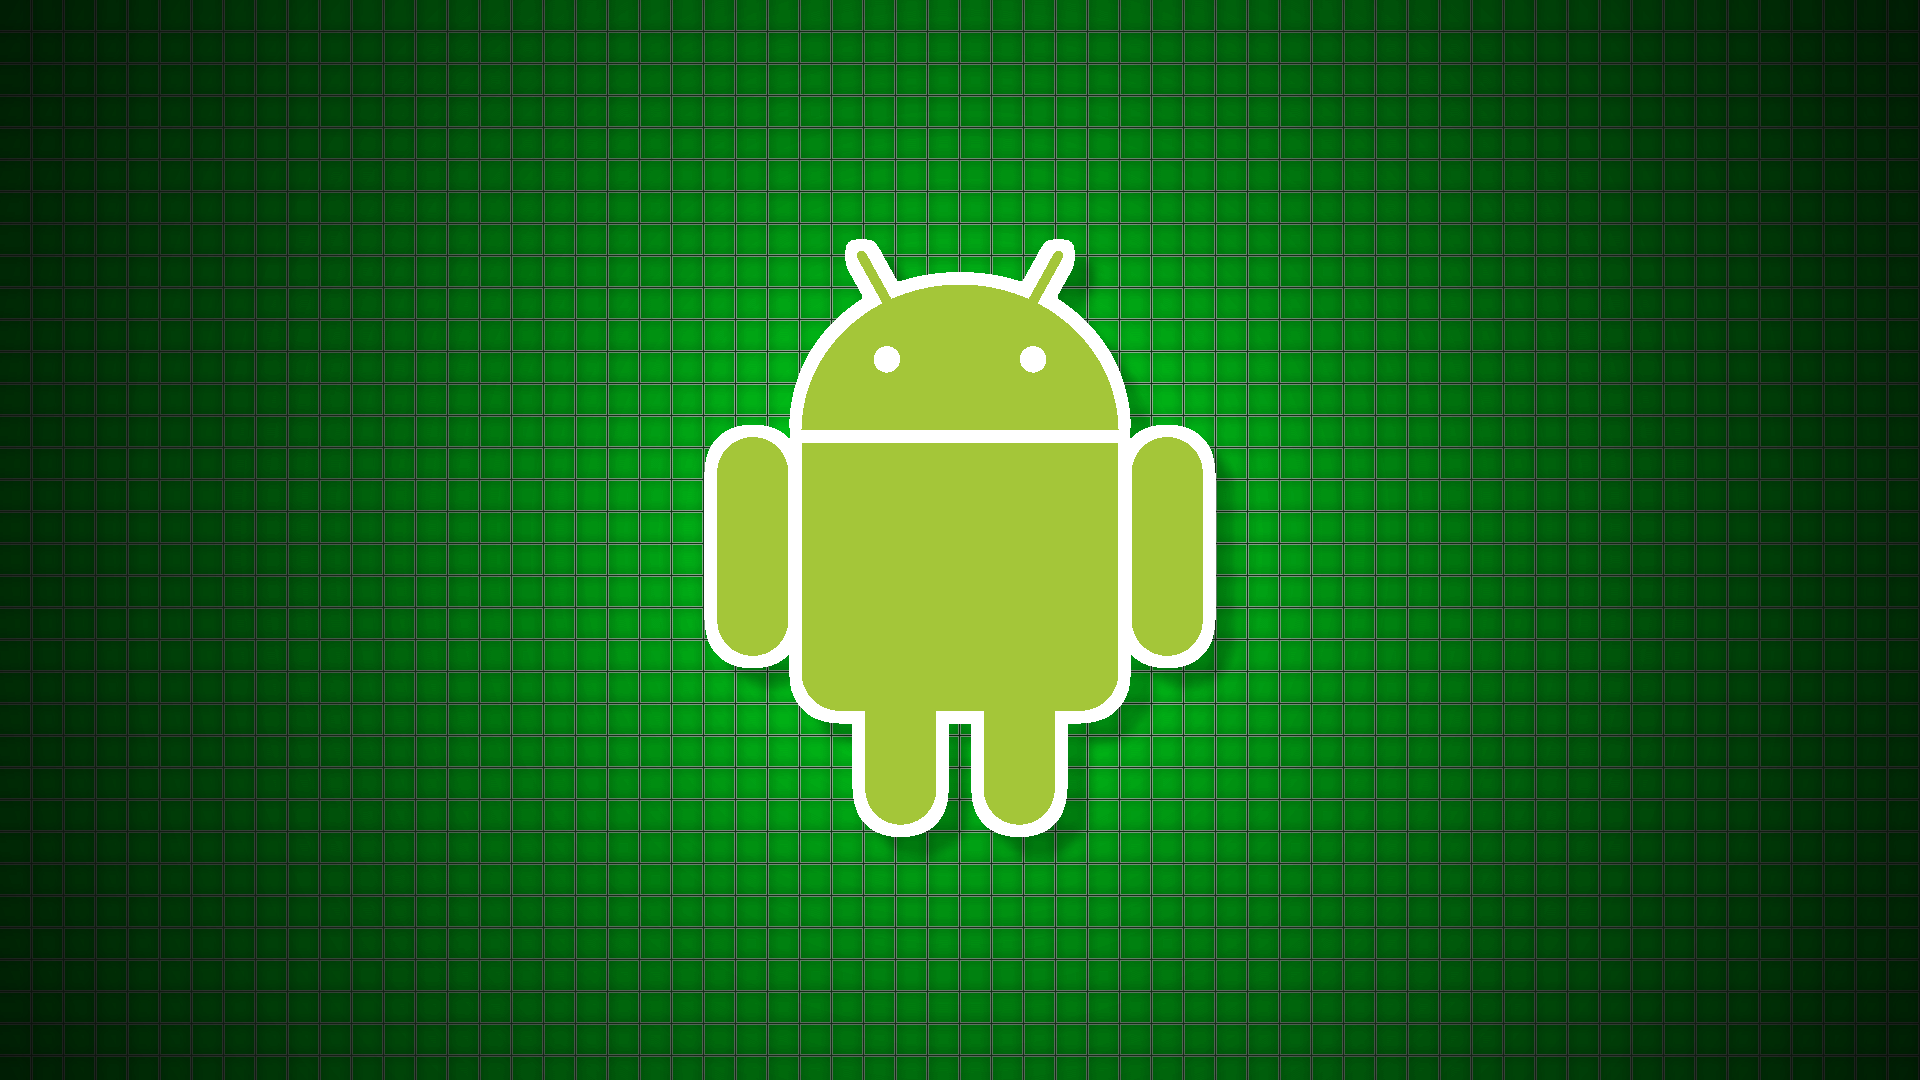 Android High-Tech Wallpaper by ToukanLab on DeviantArt